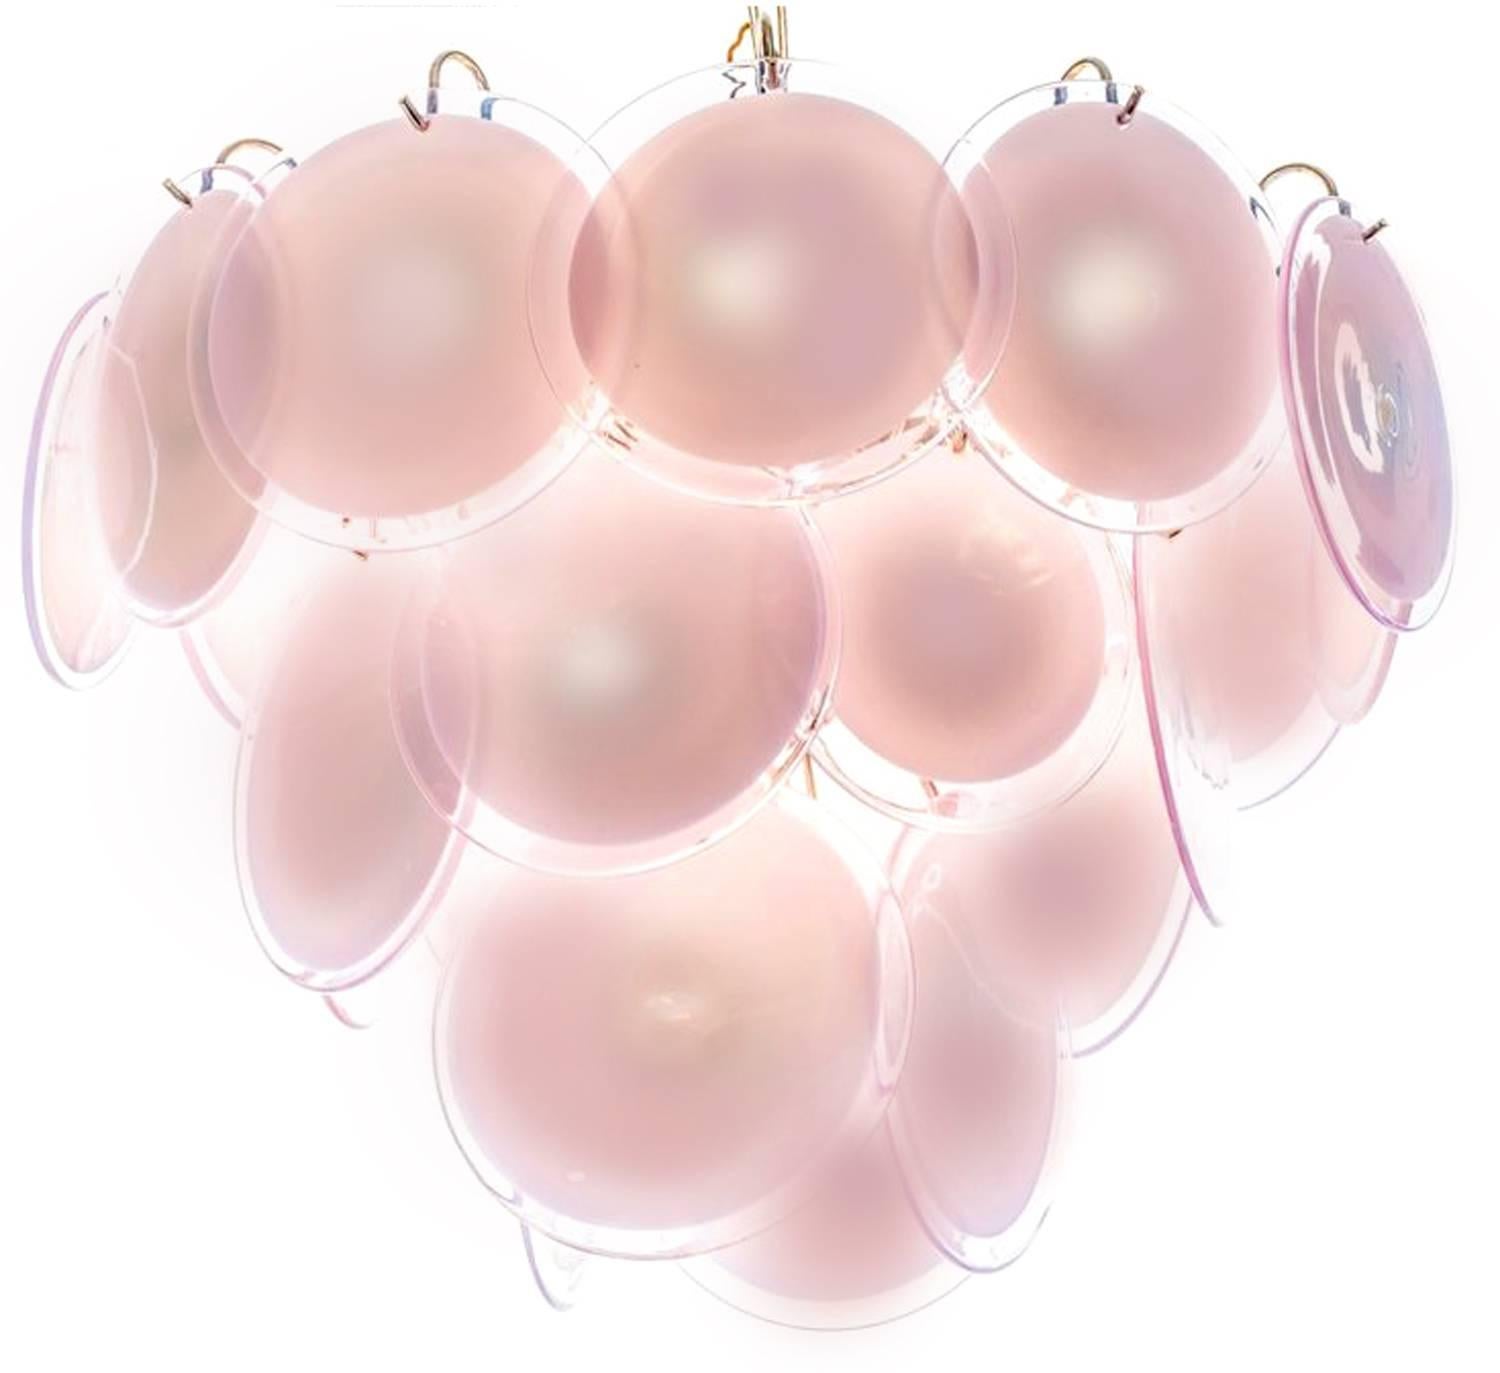 Spectacular pair of chandeliers by Vistosi made in Murano. Each chandelier is formed by 24 pink discs of precious Murano glass are arranged on floor levels. Nine lights. Measures: Height without chain 50 cm. Available also with white discs.
 